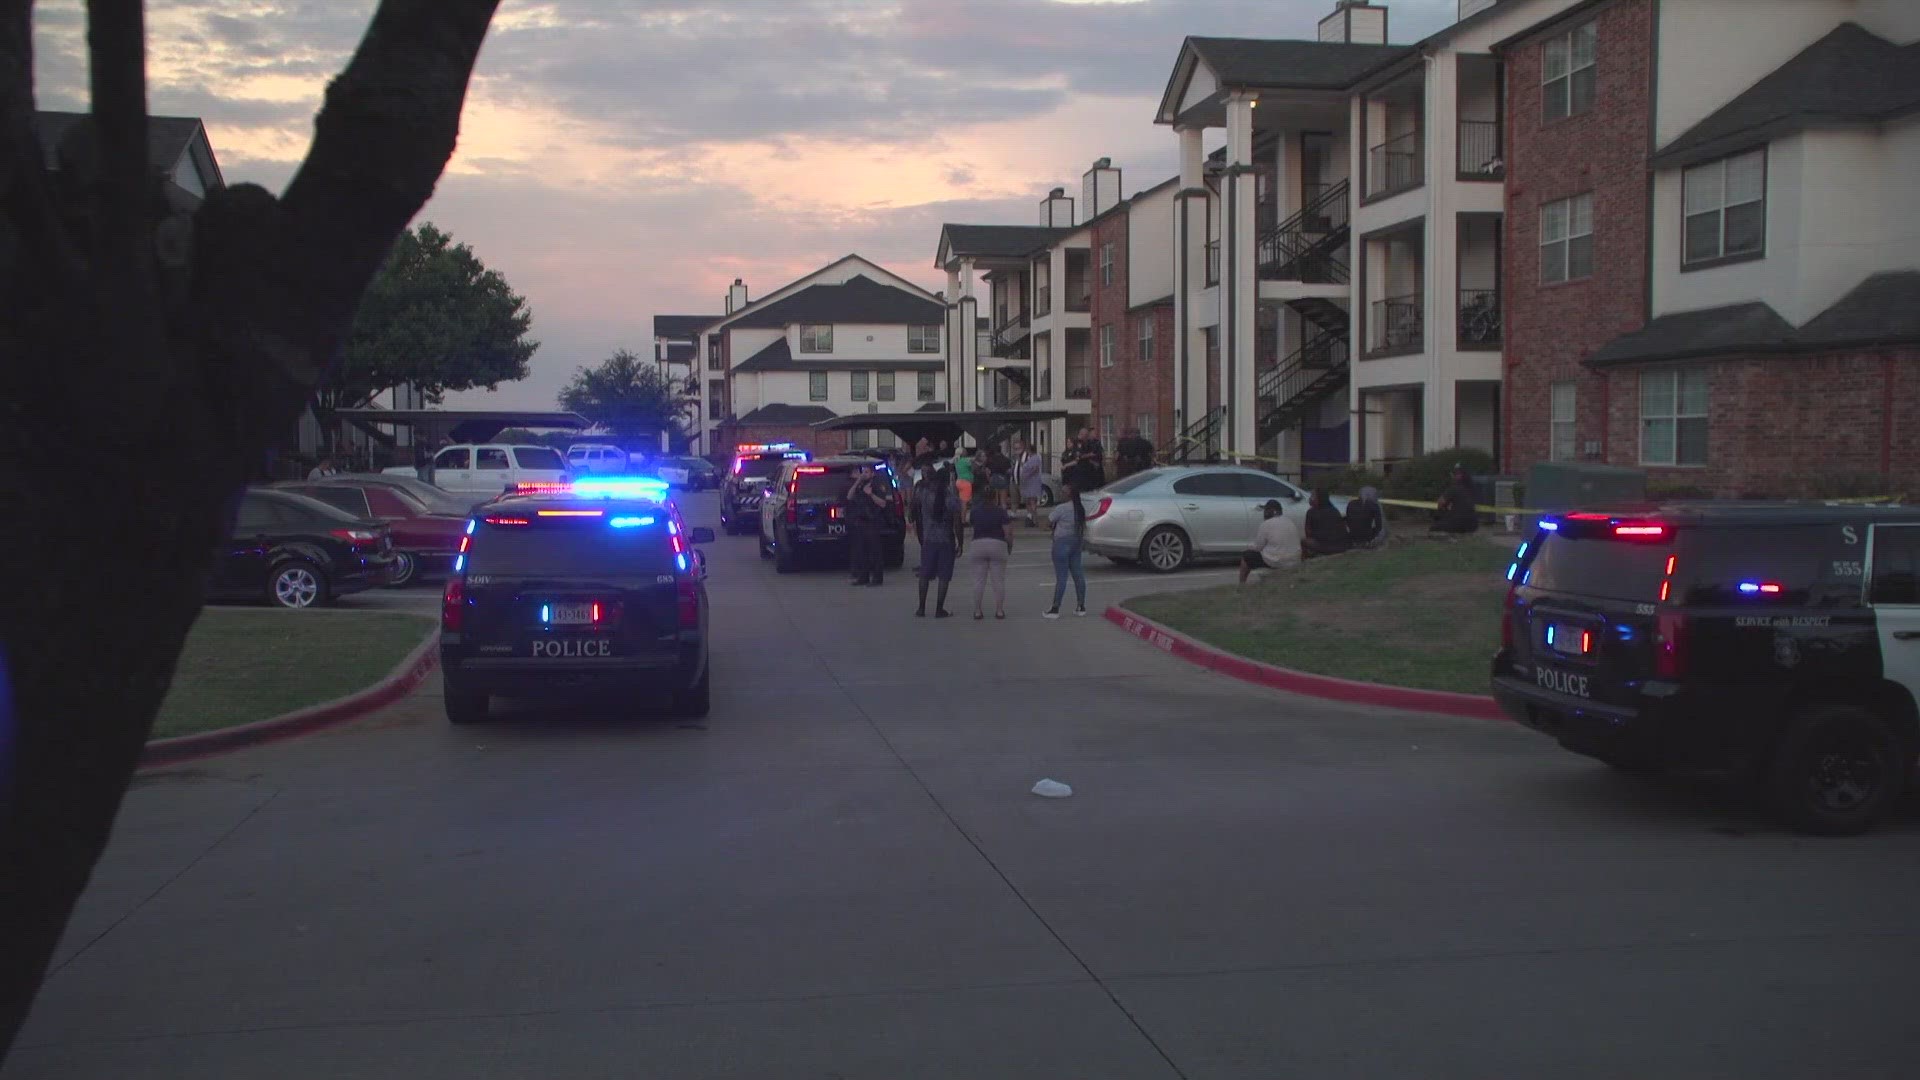 According to officials, just before 6:30 p.m. officers were called to the Arwen apartments, near Sycamore School Road and Crowley Road.